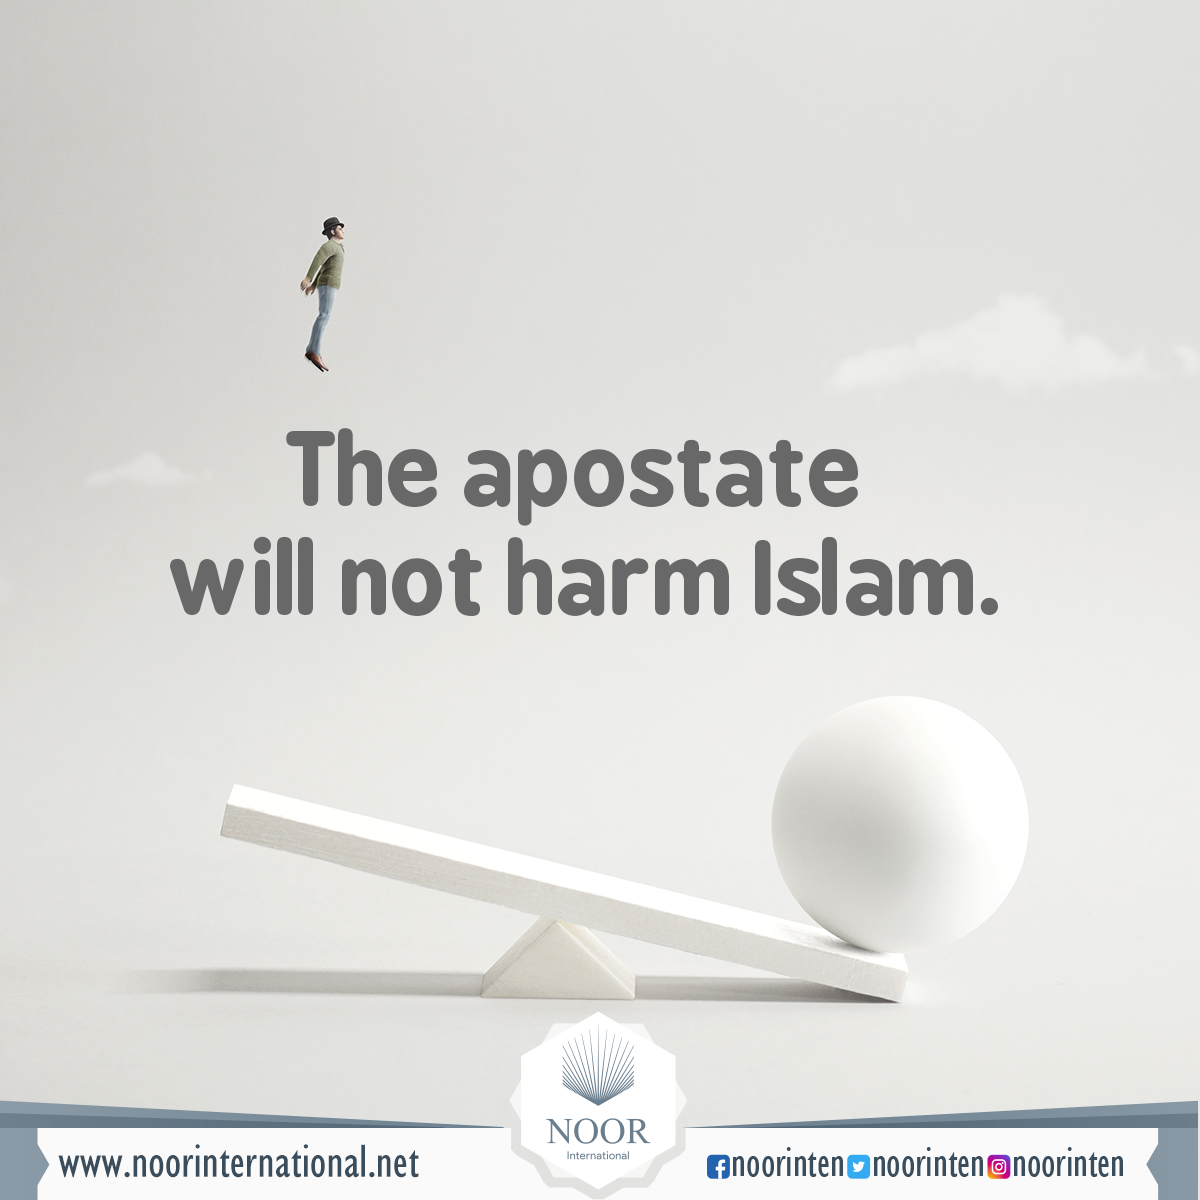 The apostate will not harm Islam.